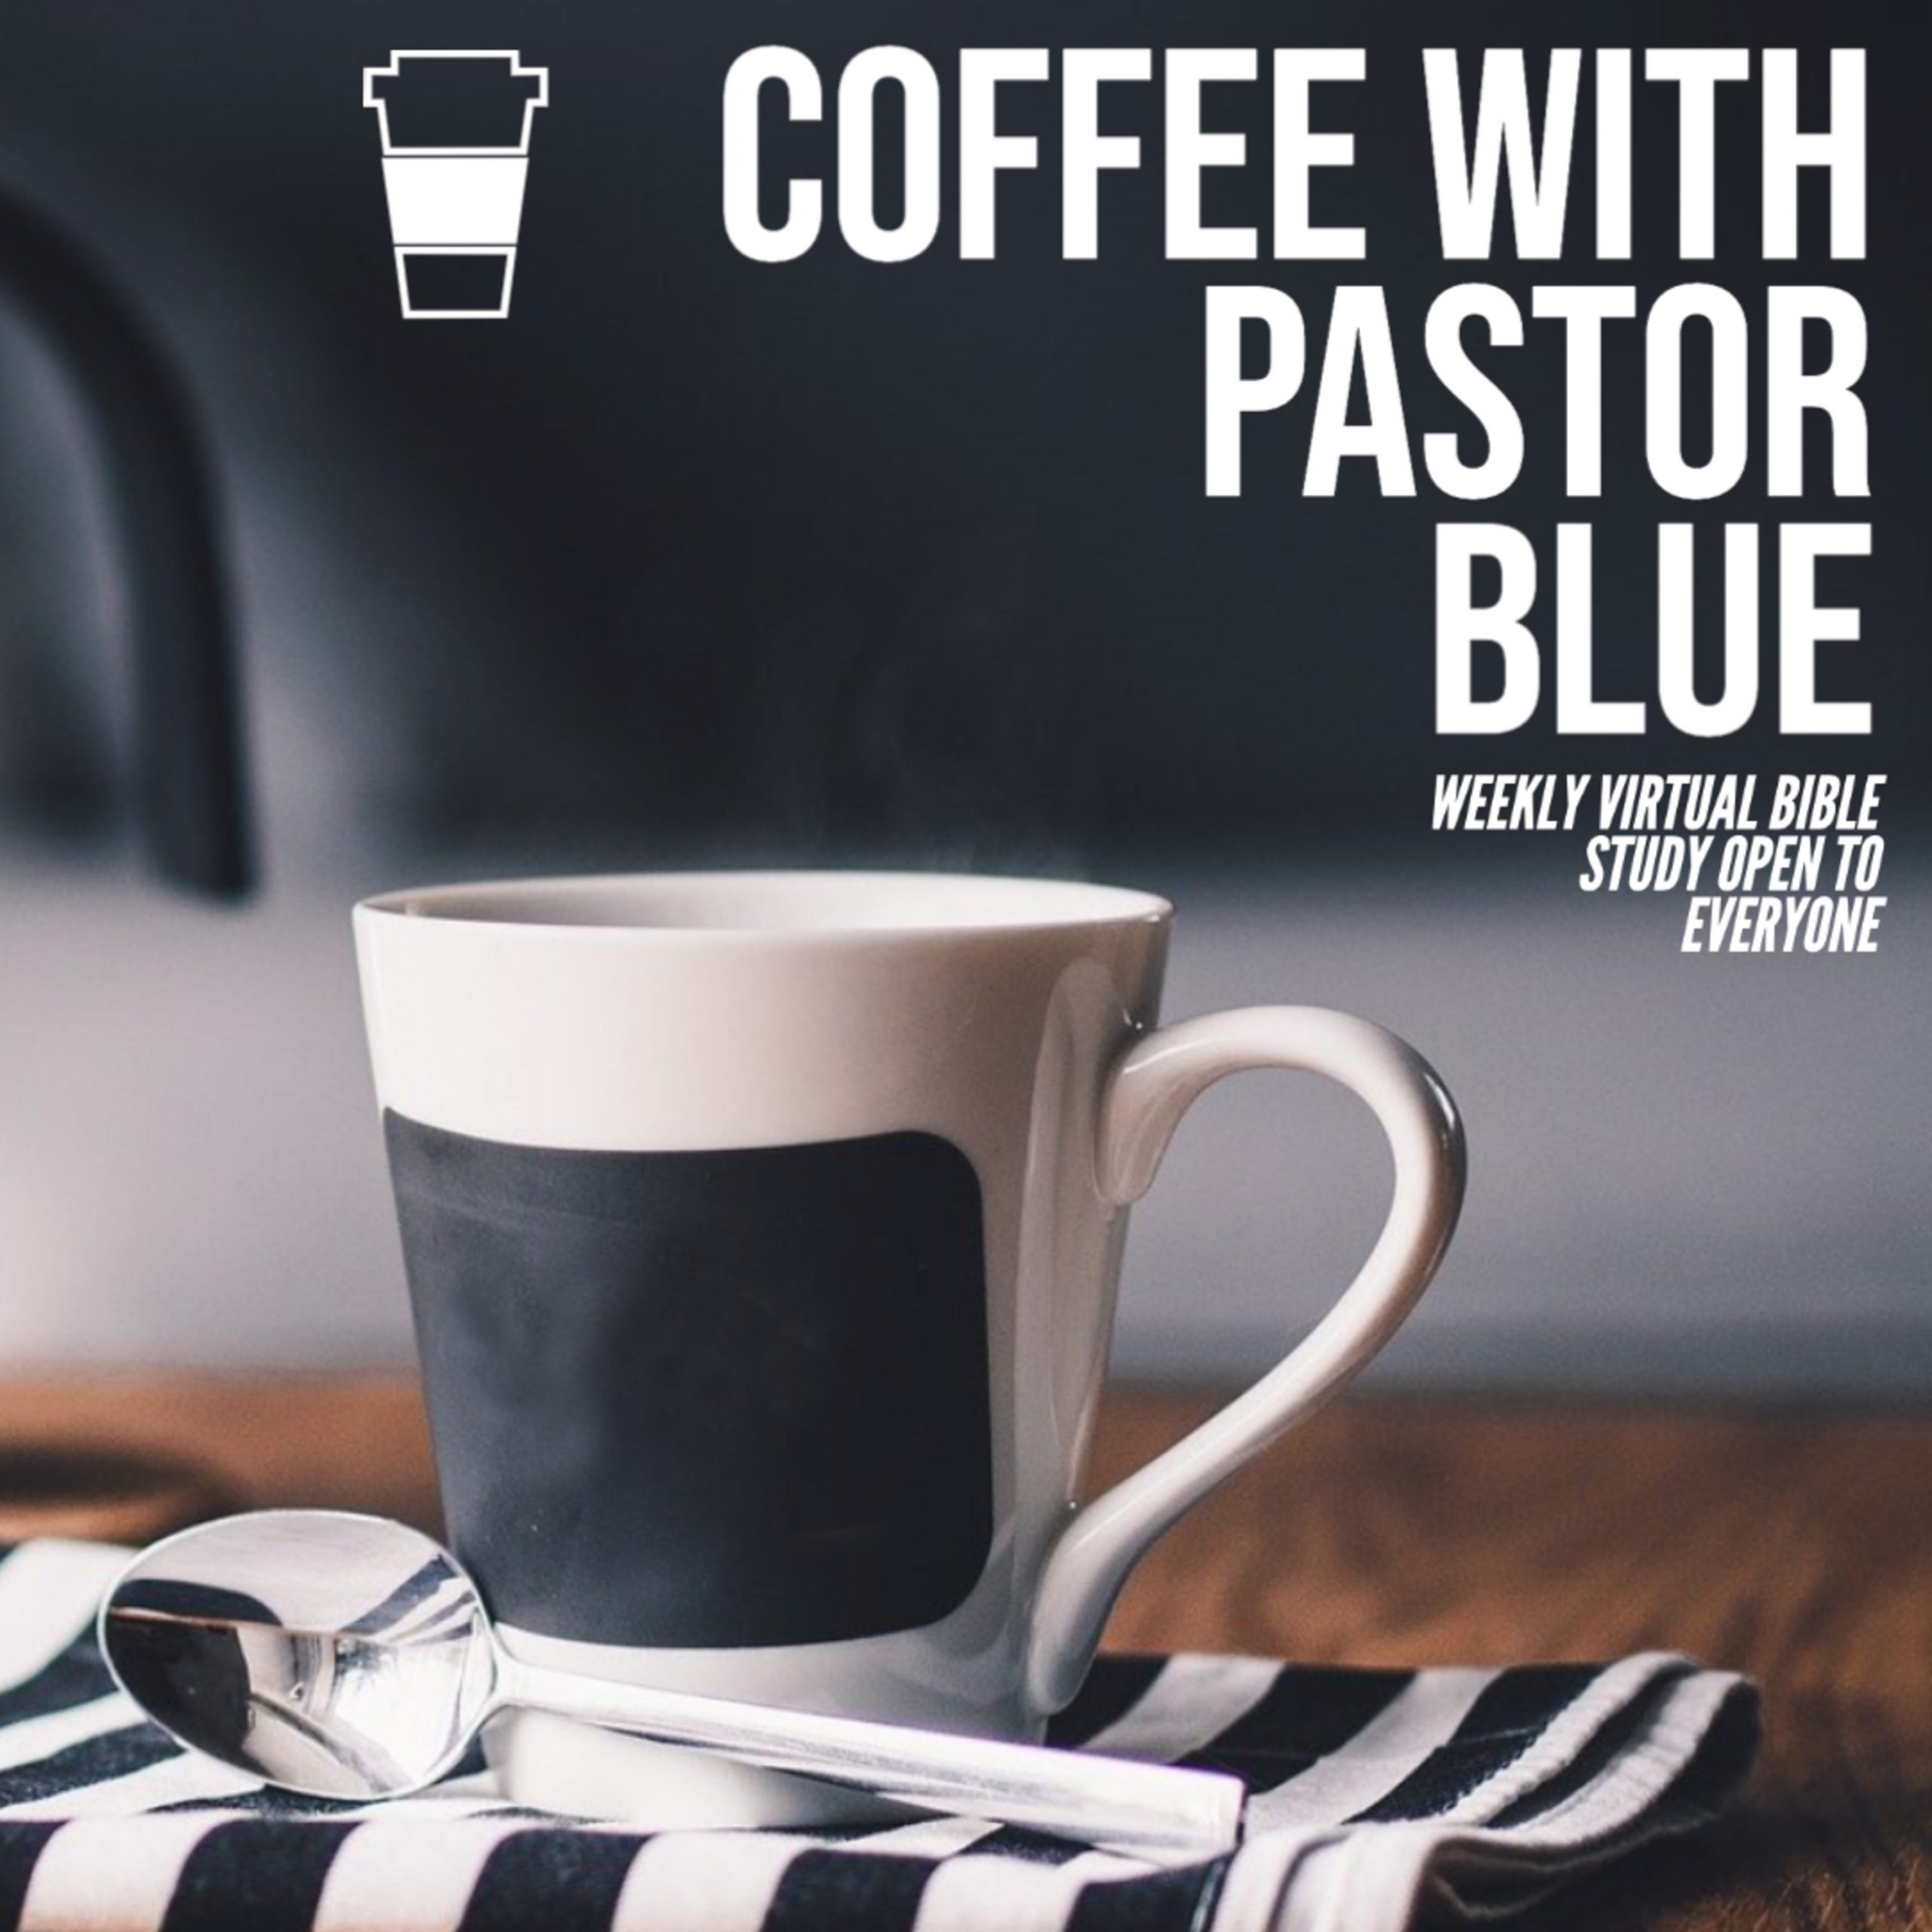 You are currently viewing Coffee with the Pastor Episode 1